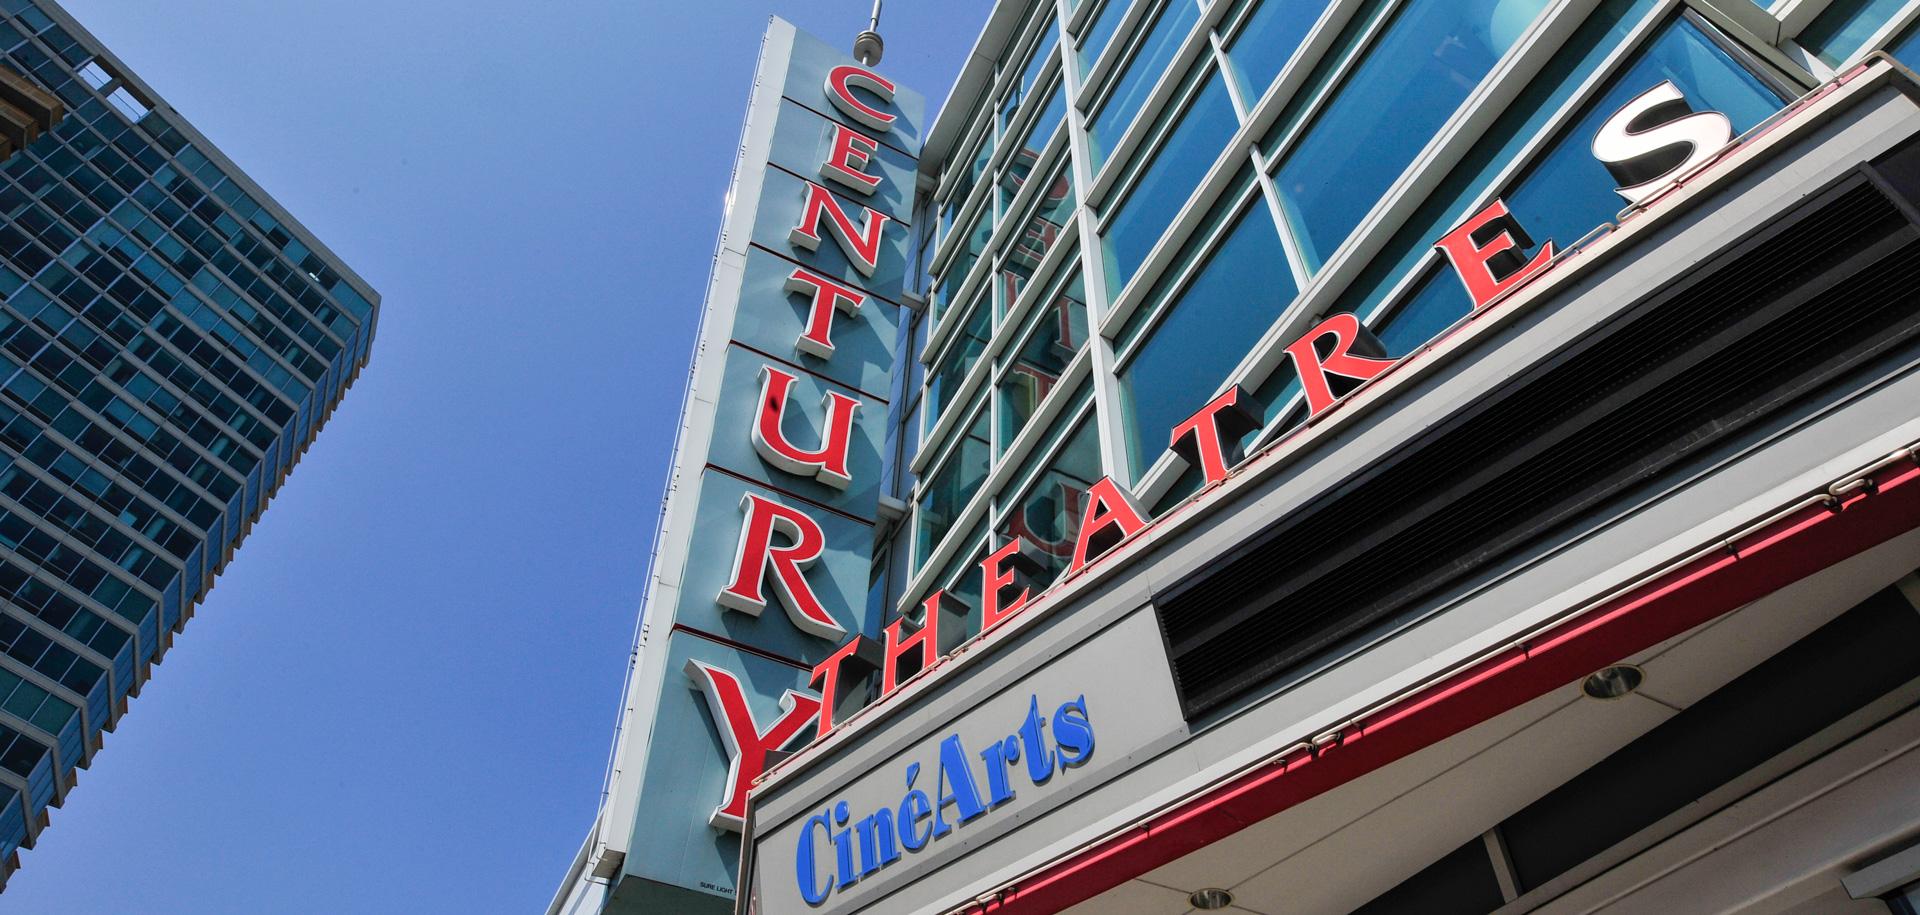 Looking up at the signage for CineArts at Church Street Plaza.